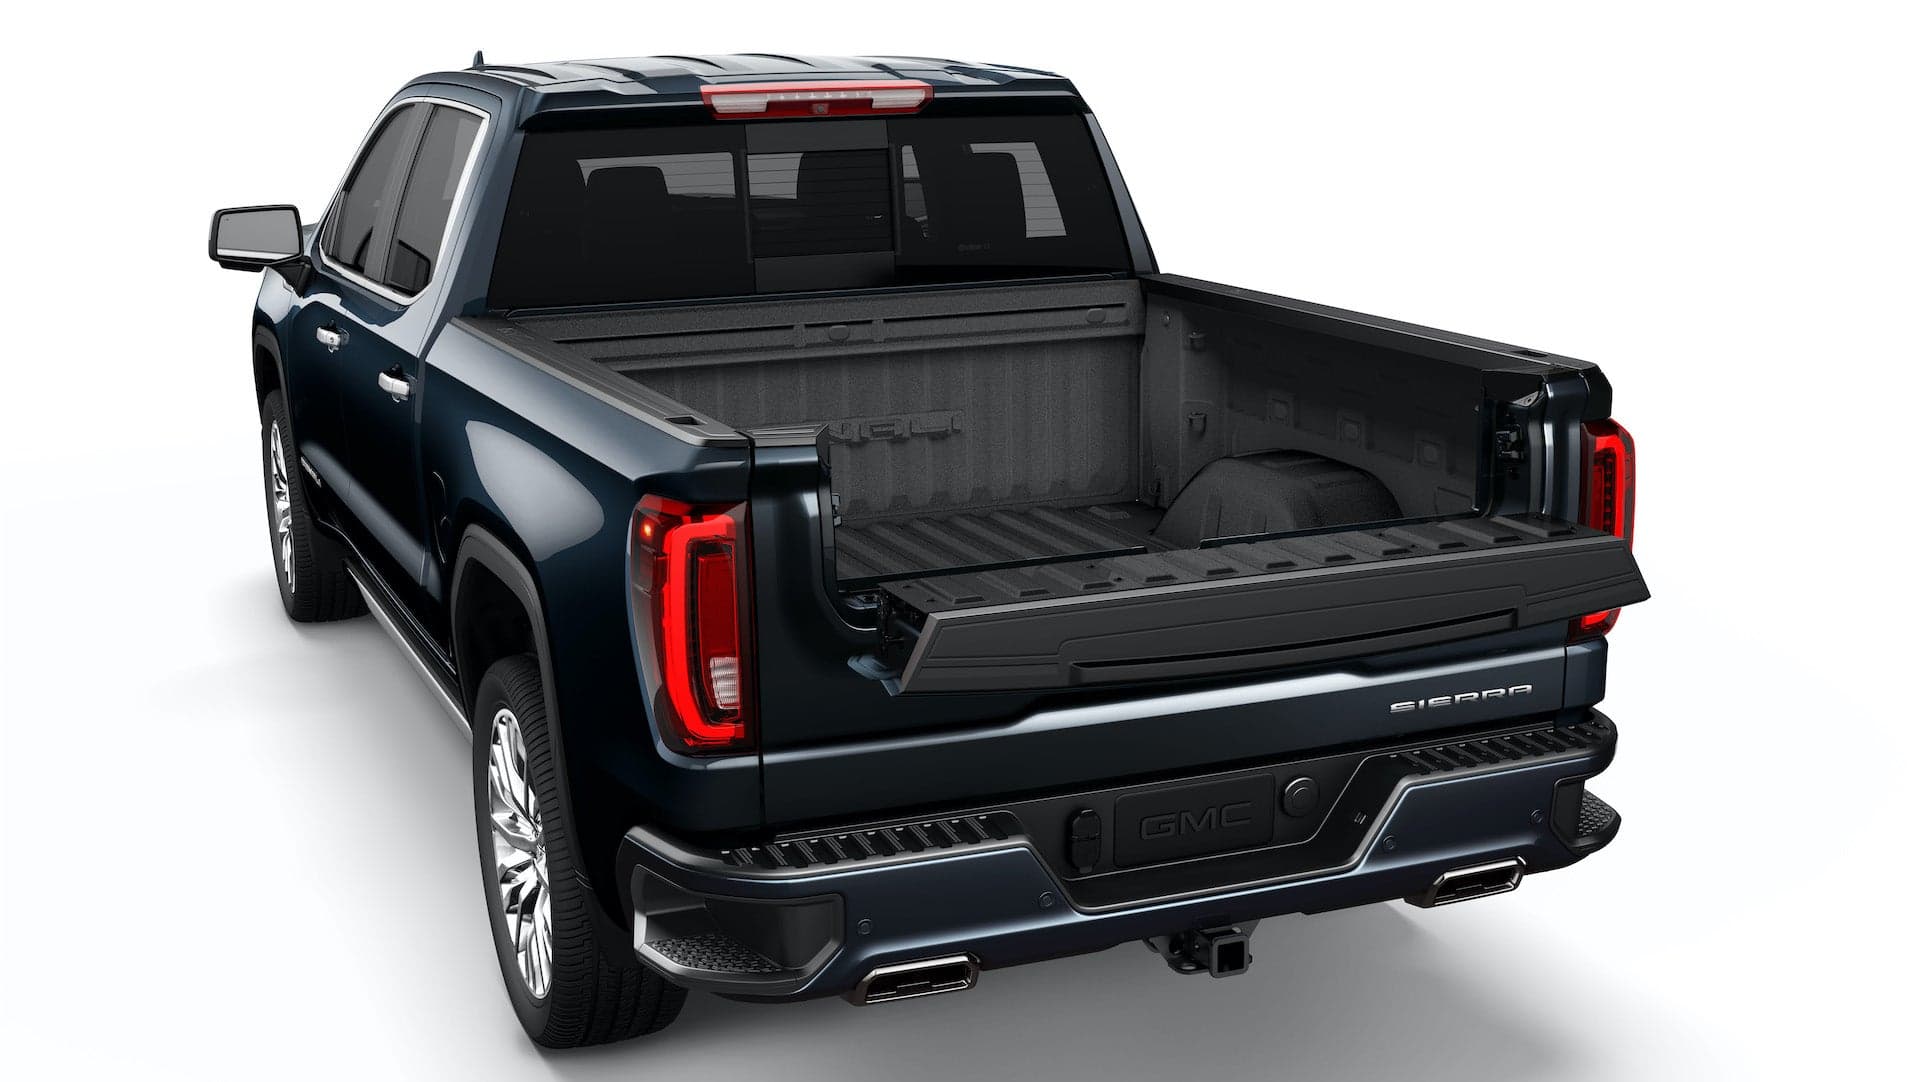 It Looks Like the Chevy Silverado Is Getting a Multi-Purpose Tailgate